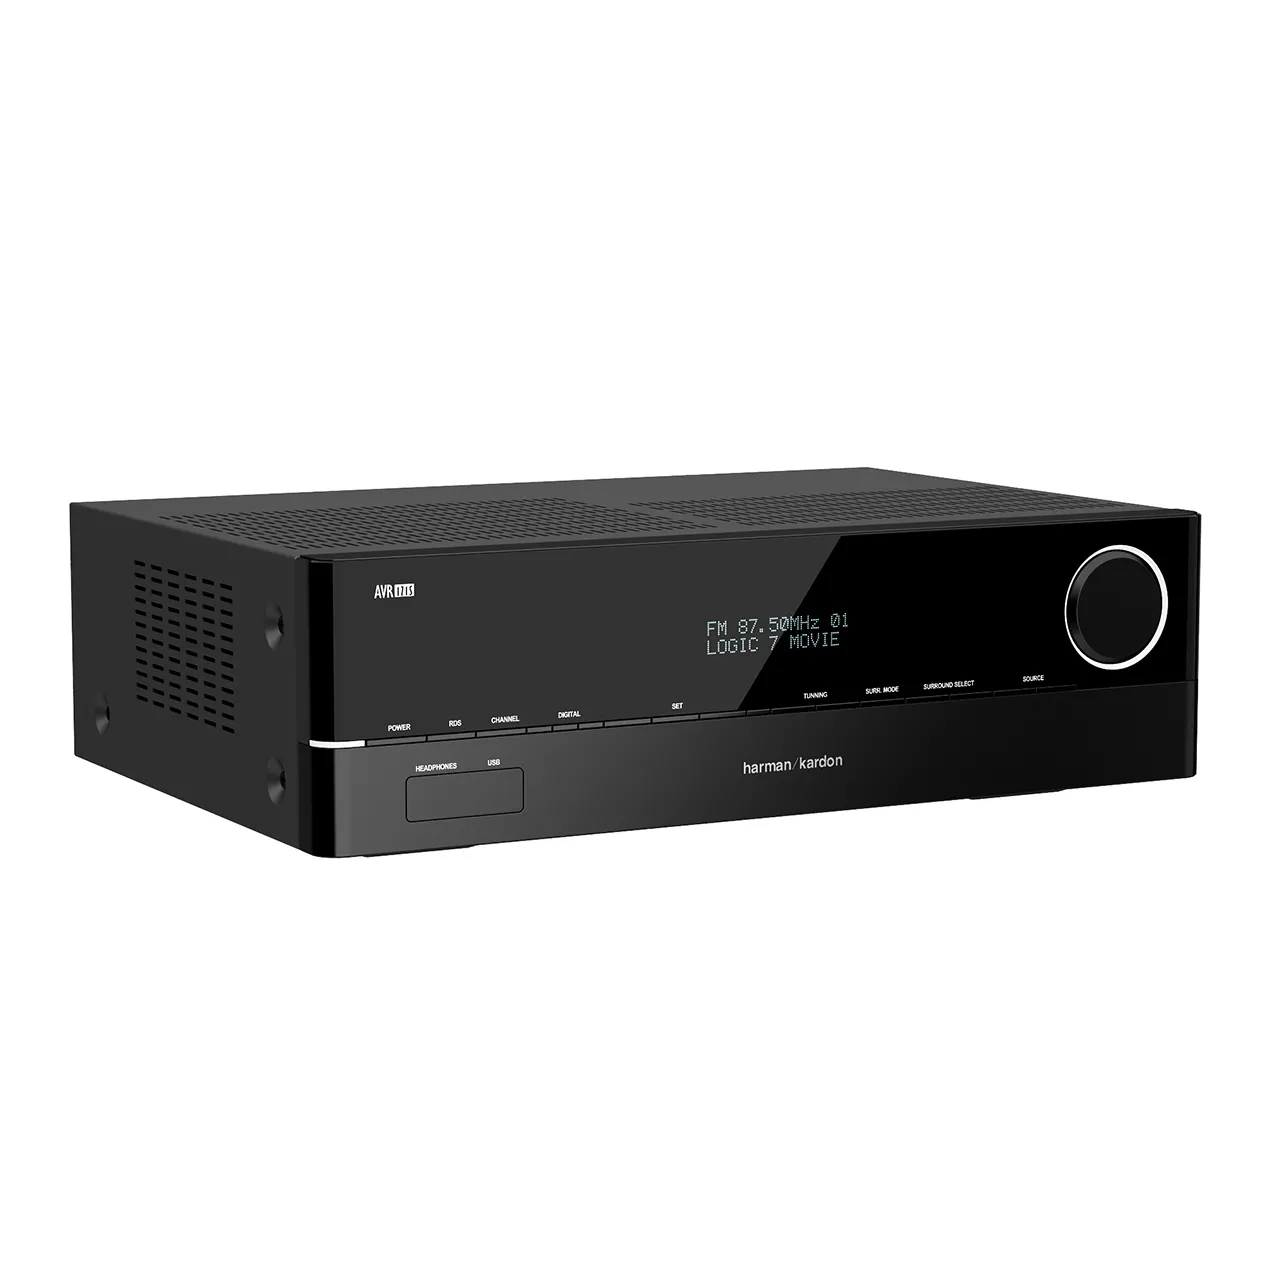 Products – audio-video-receiver-avr171s-by-harman-kardon